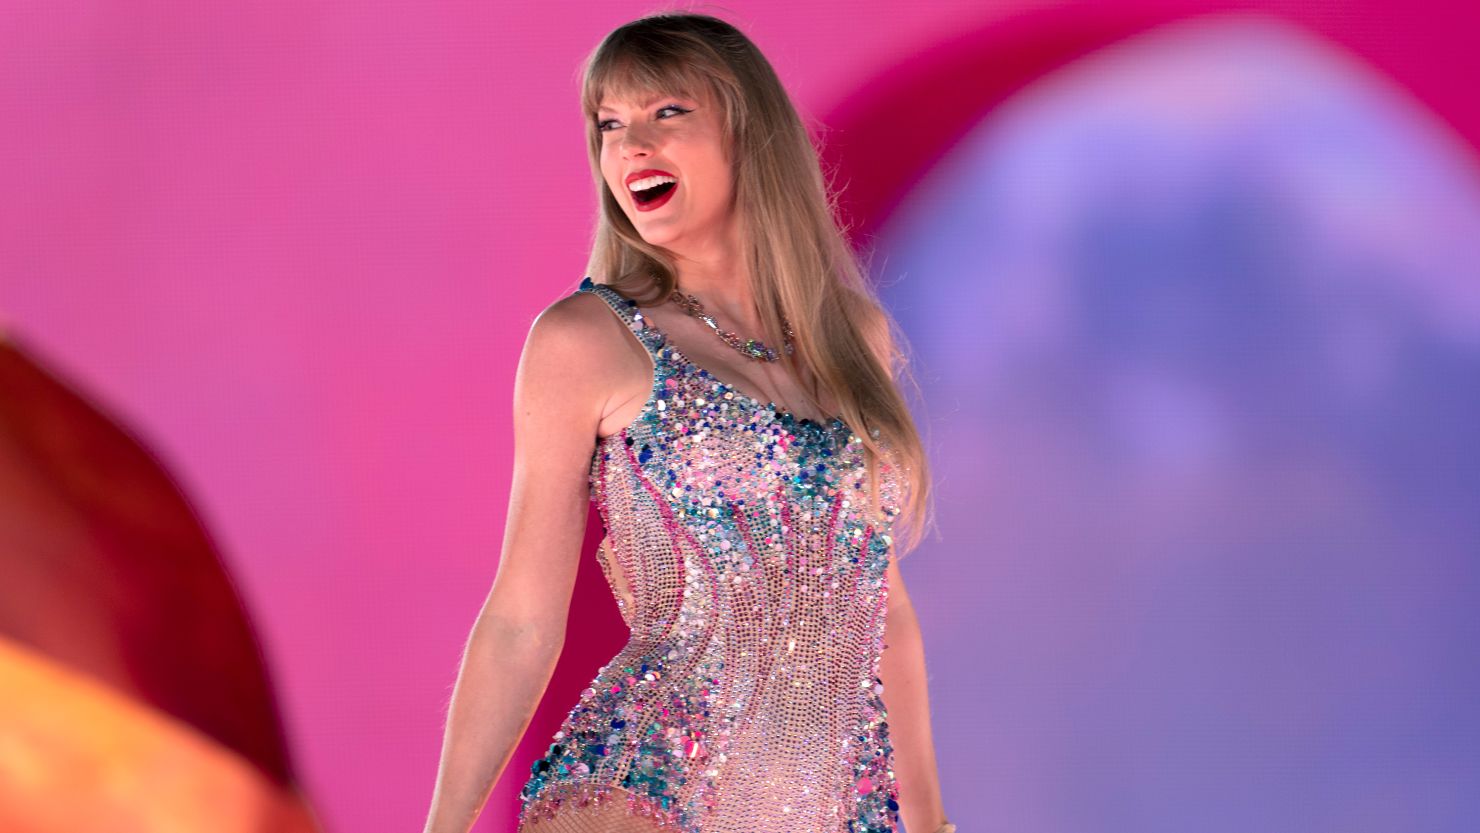 Taylor Swift performs during "The Eras Tour" in Nashville, Tenn., May 5, 2023. According to Spotify Wrapped, Swift was 2023's most-streamed artist globally.